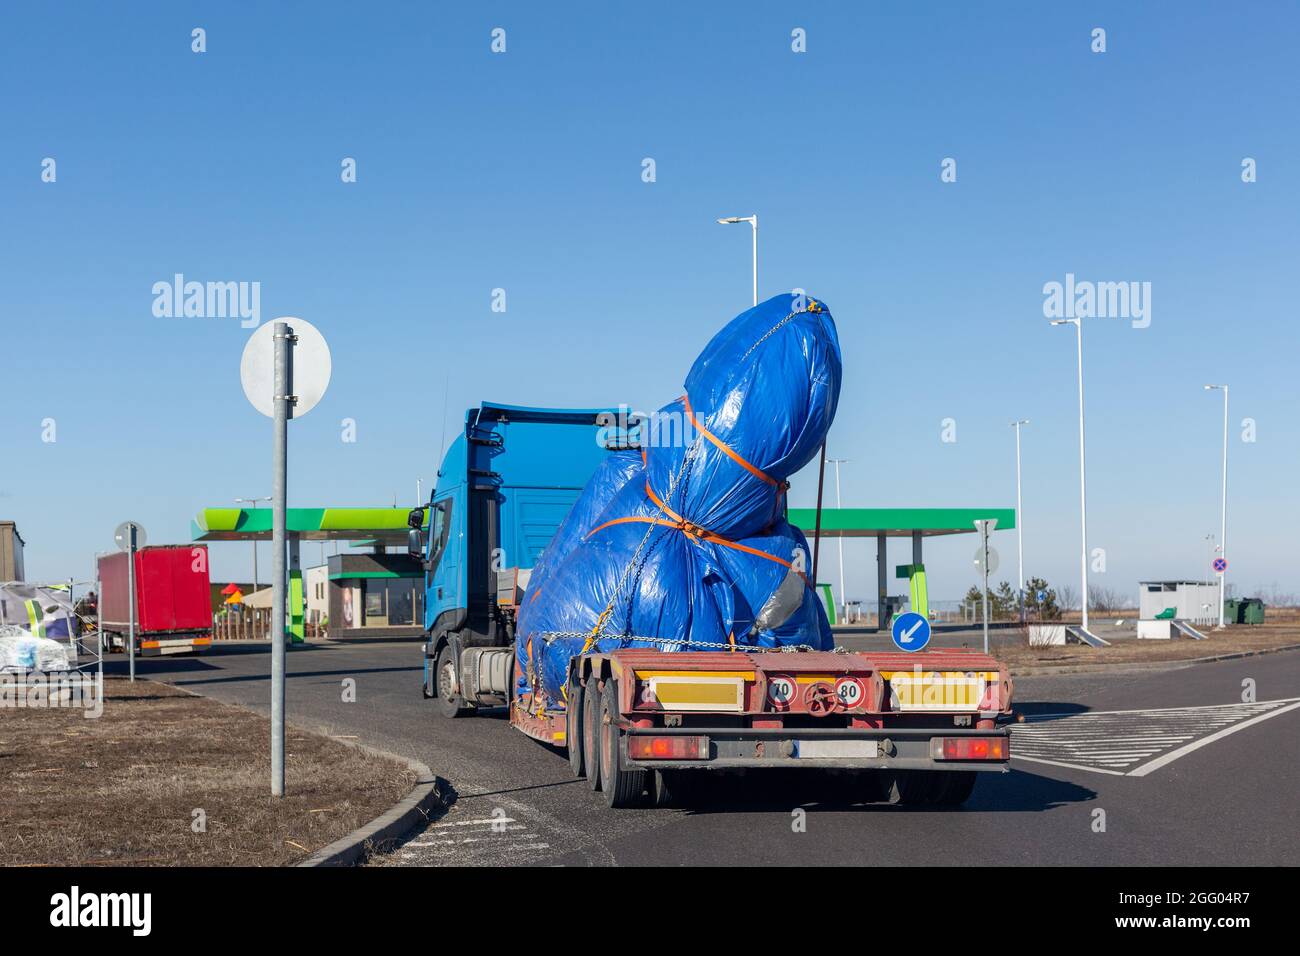 Blue truck with special semi-trailer for oversized loads transportation. Oversize load on flatbed trailer. Stock Photo